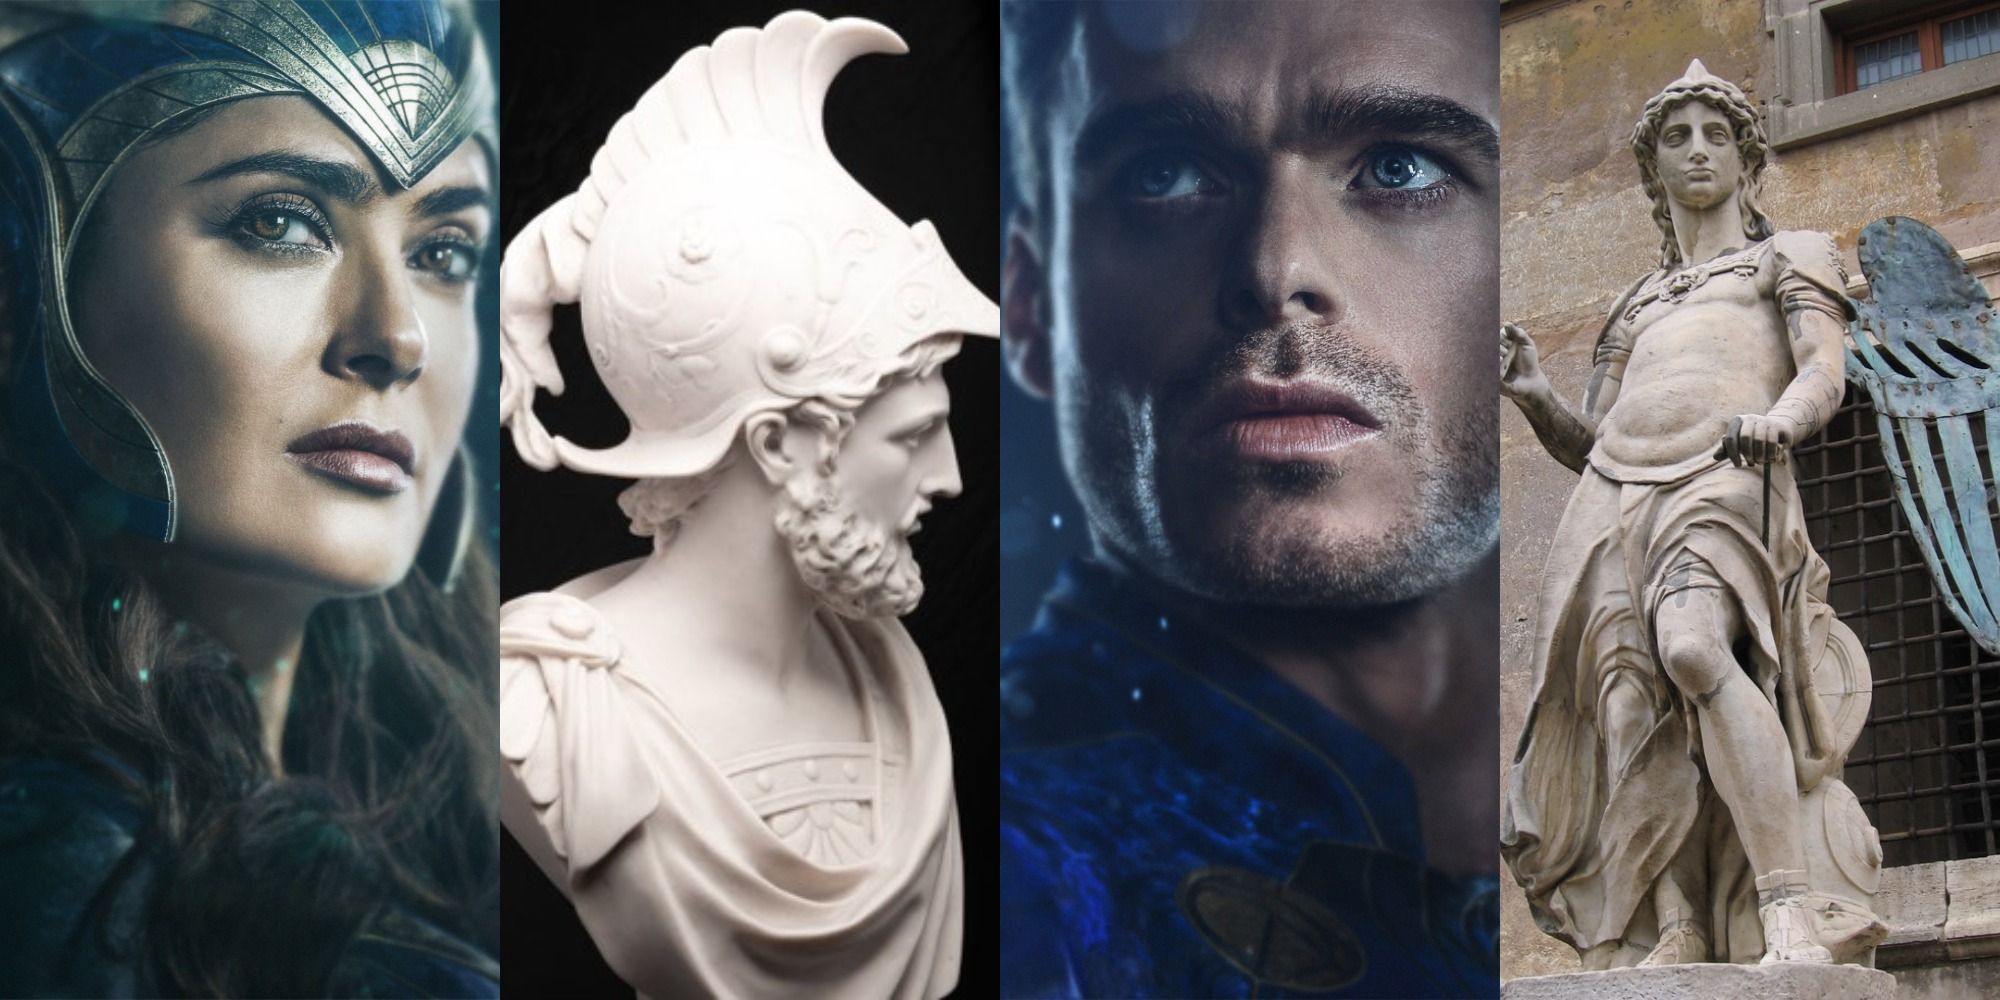 Split image showing Ajak and Ikaris from Eternals and statues of Ajax and Icarus